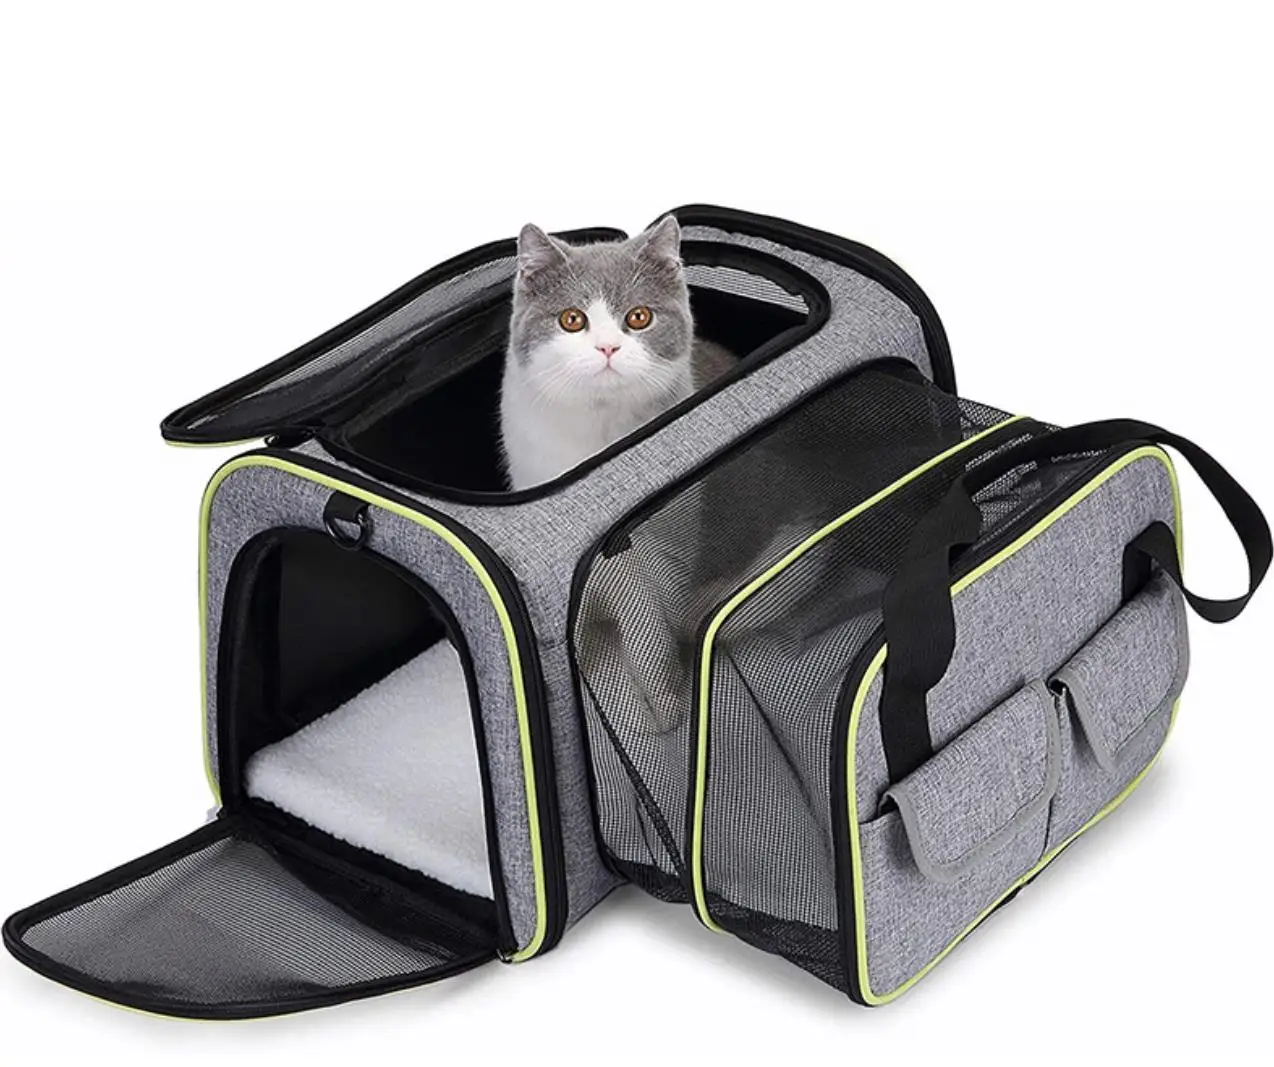 

Custom Expandable Pet Carrier Soft Sided Warm Bottom Mat Large Space Fat Cat 10kg Dog Travel In Vehicles Airline Approved, Customized